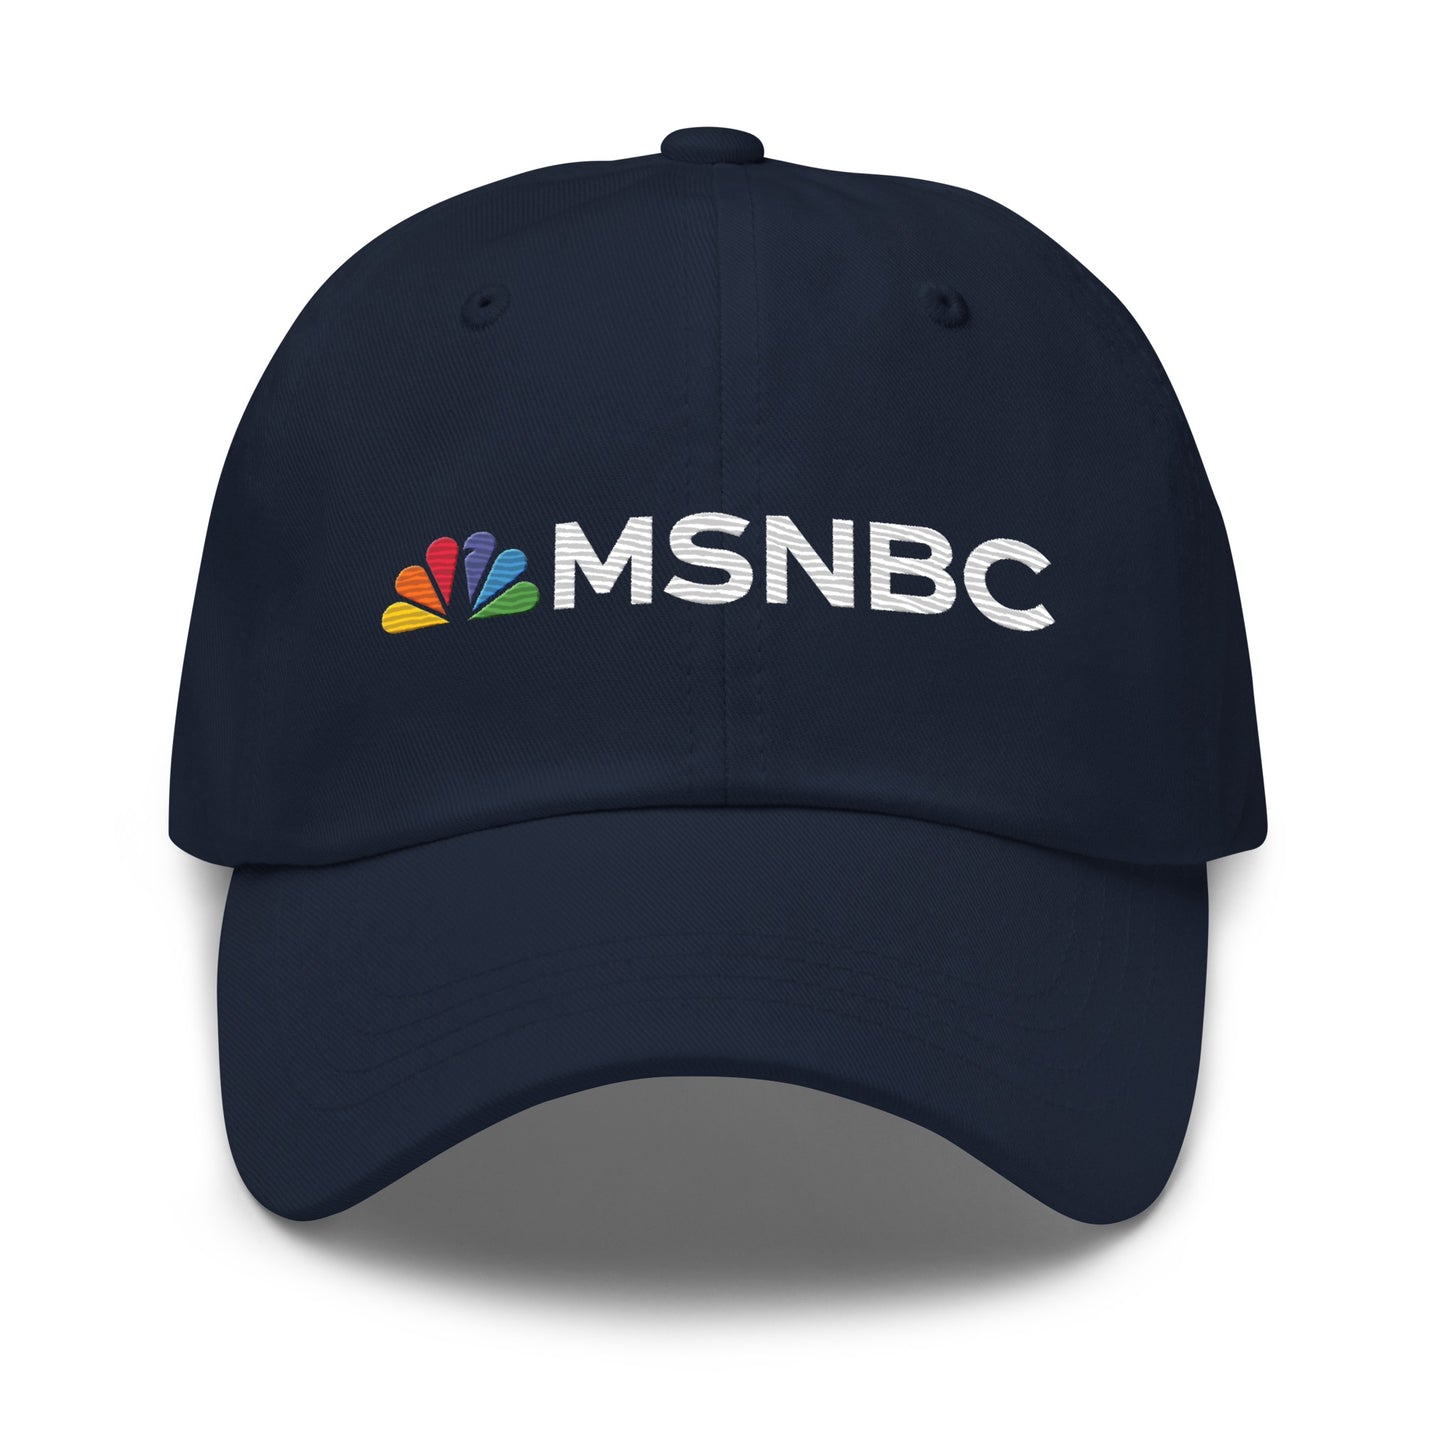 MSNBC Gear LOGO Embroidered Hat